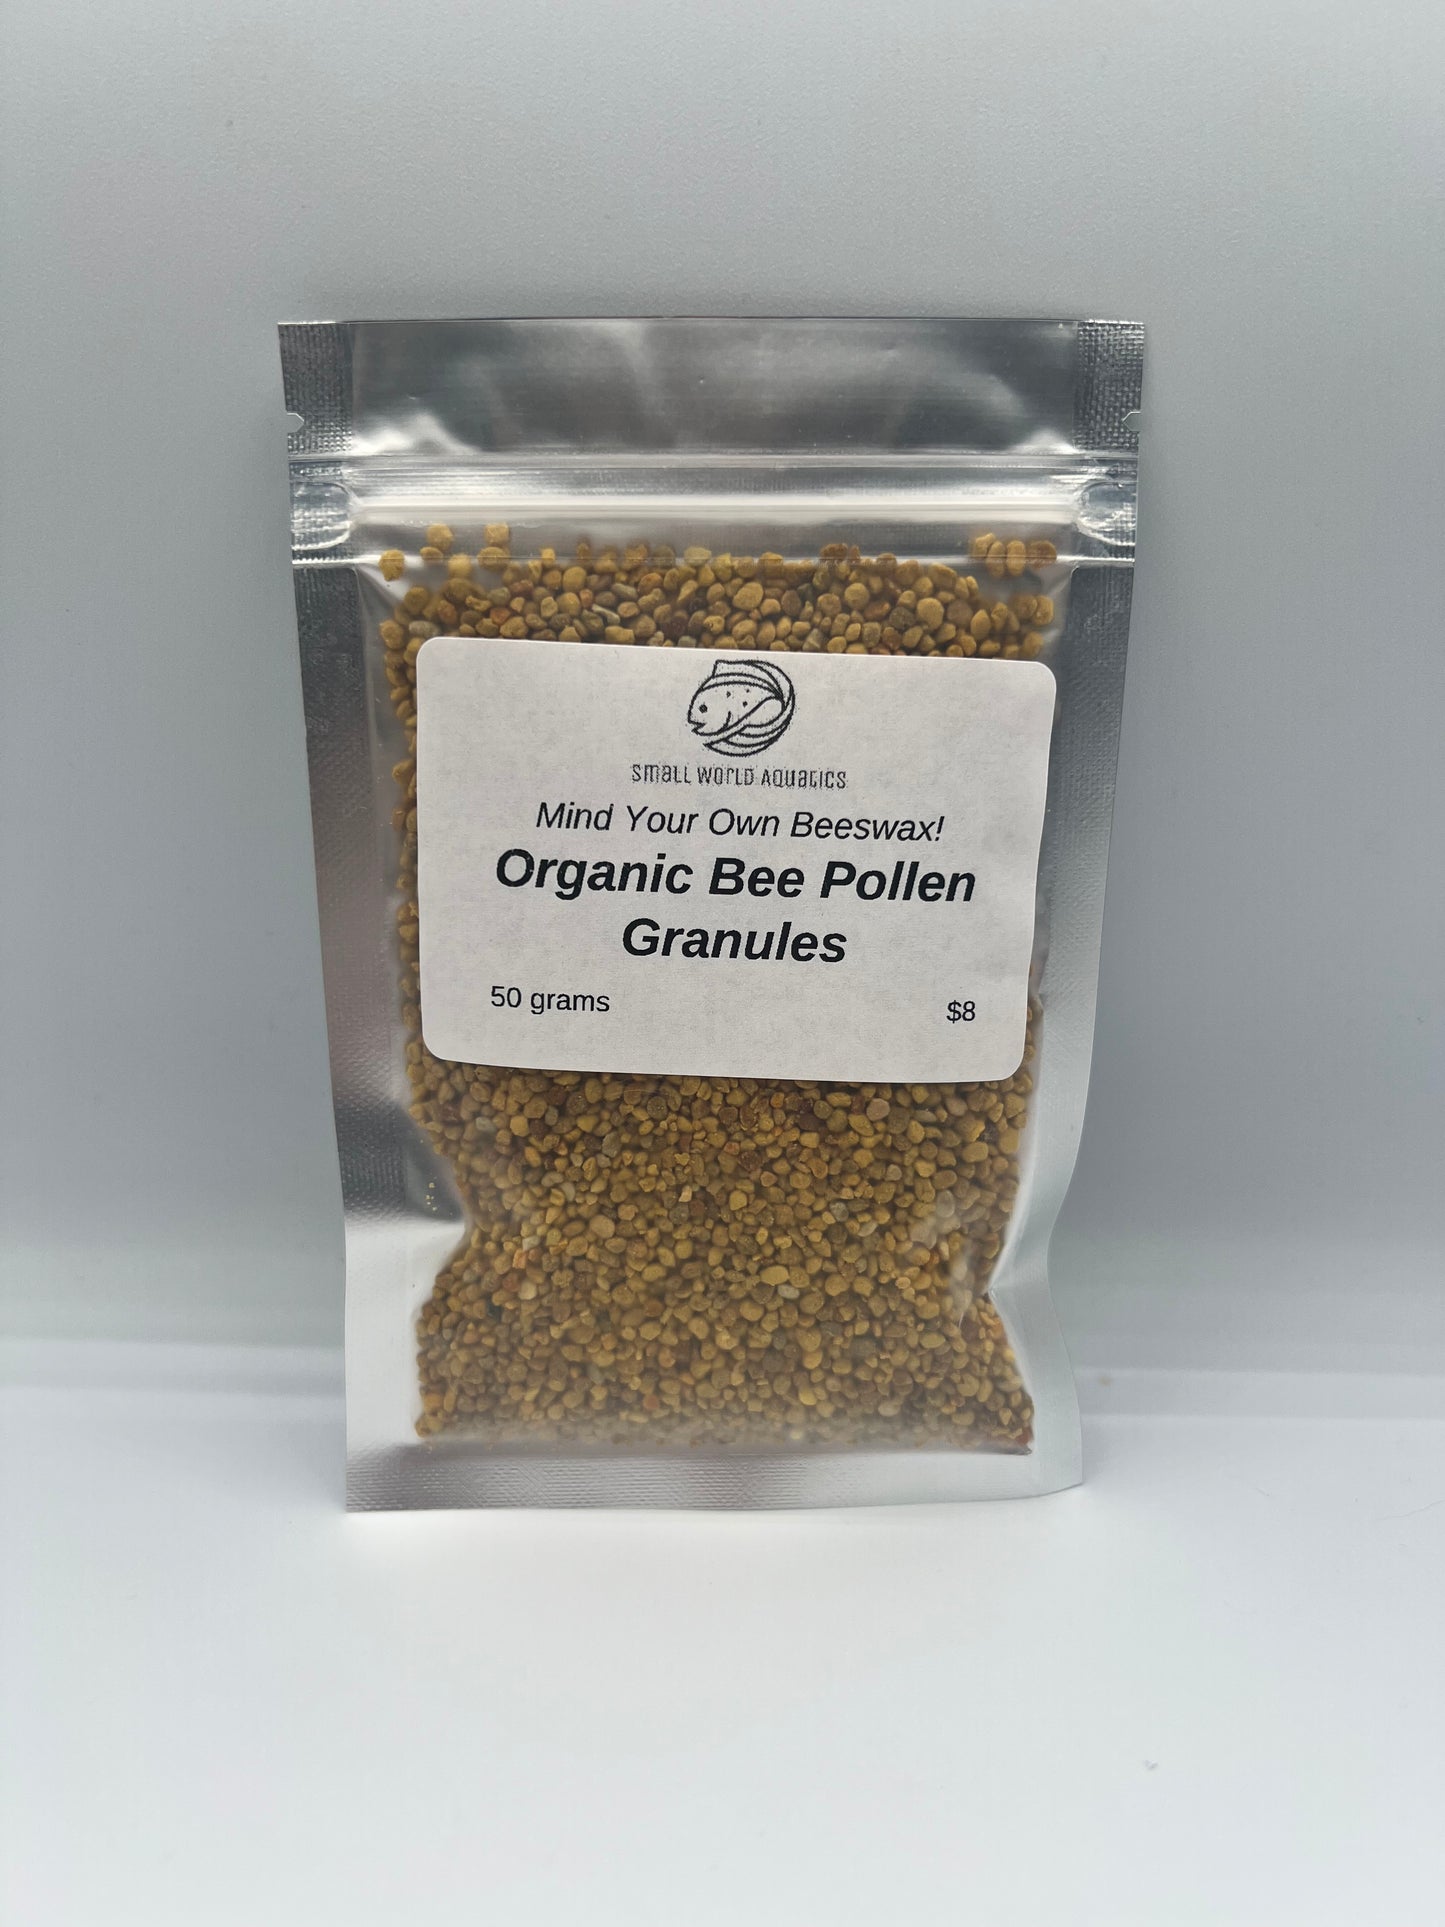 Mind Your Beeswax...Organic Bee Pollen Granules